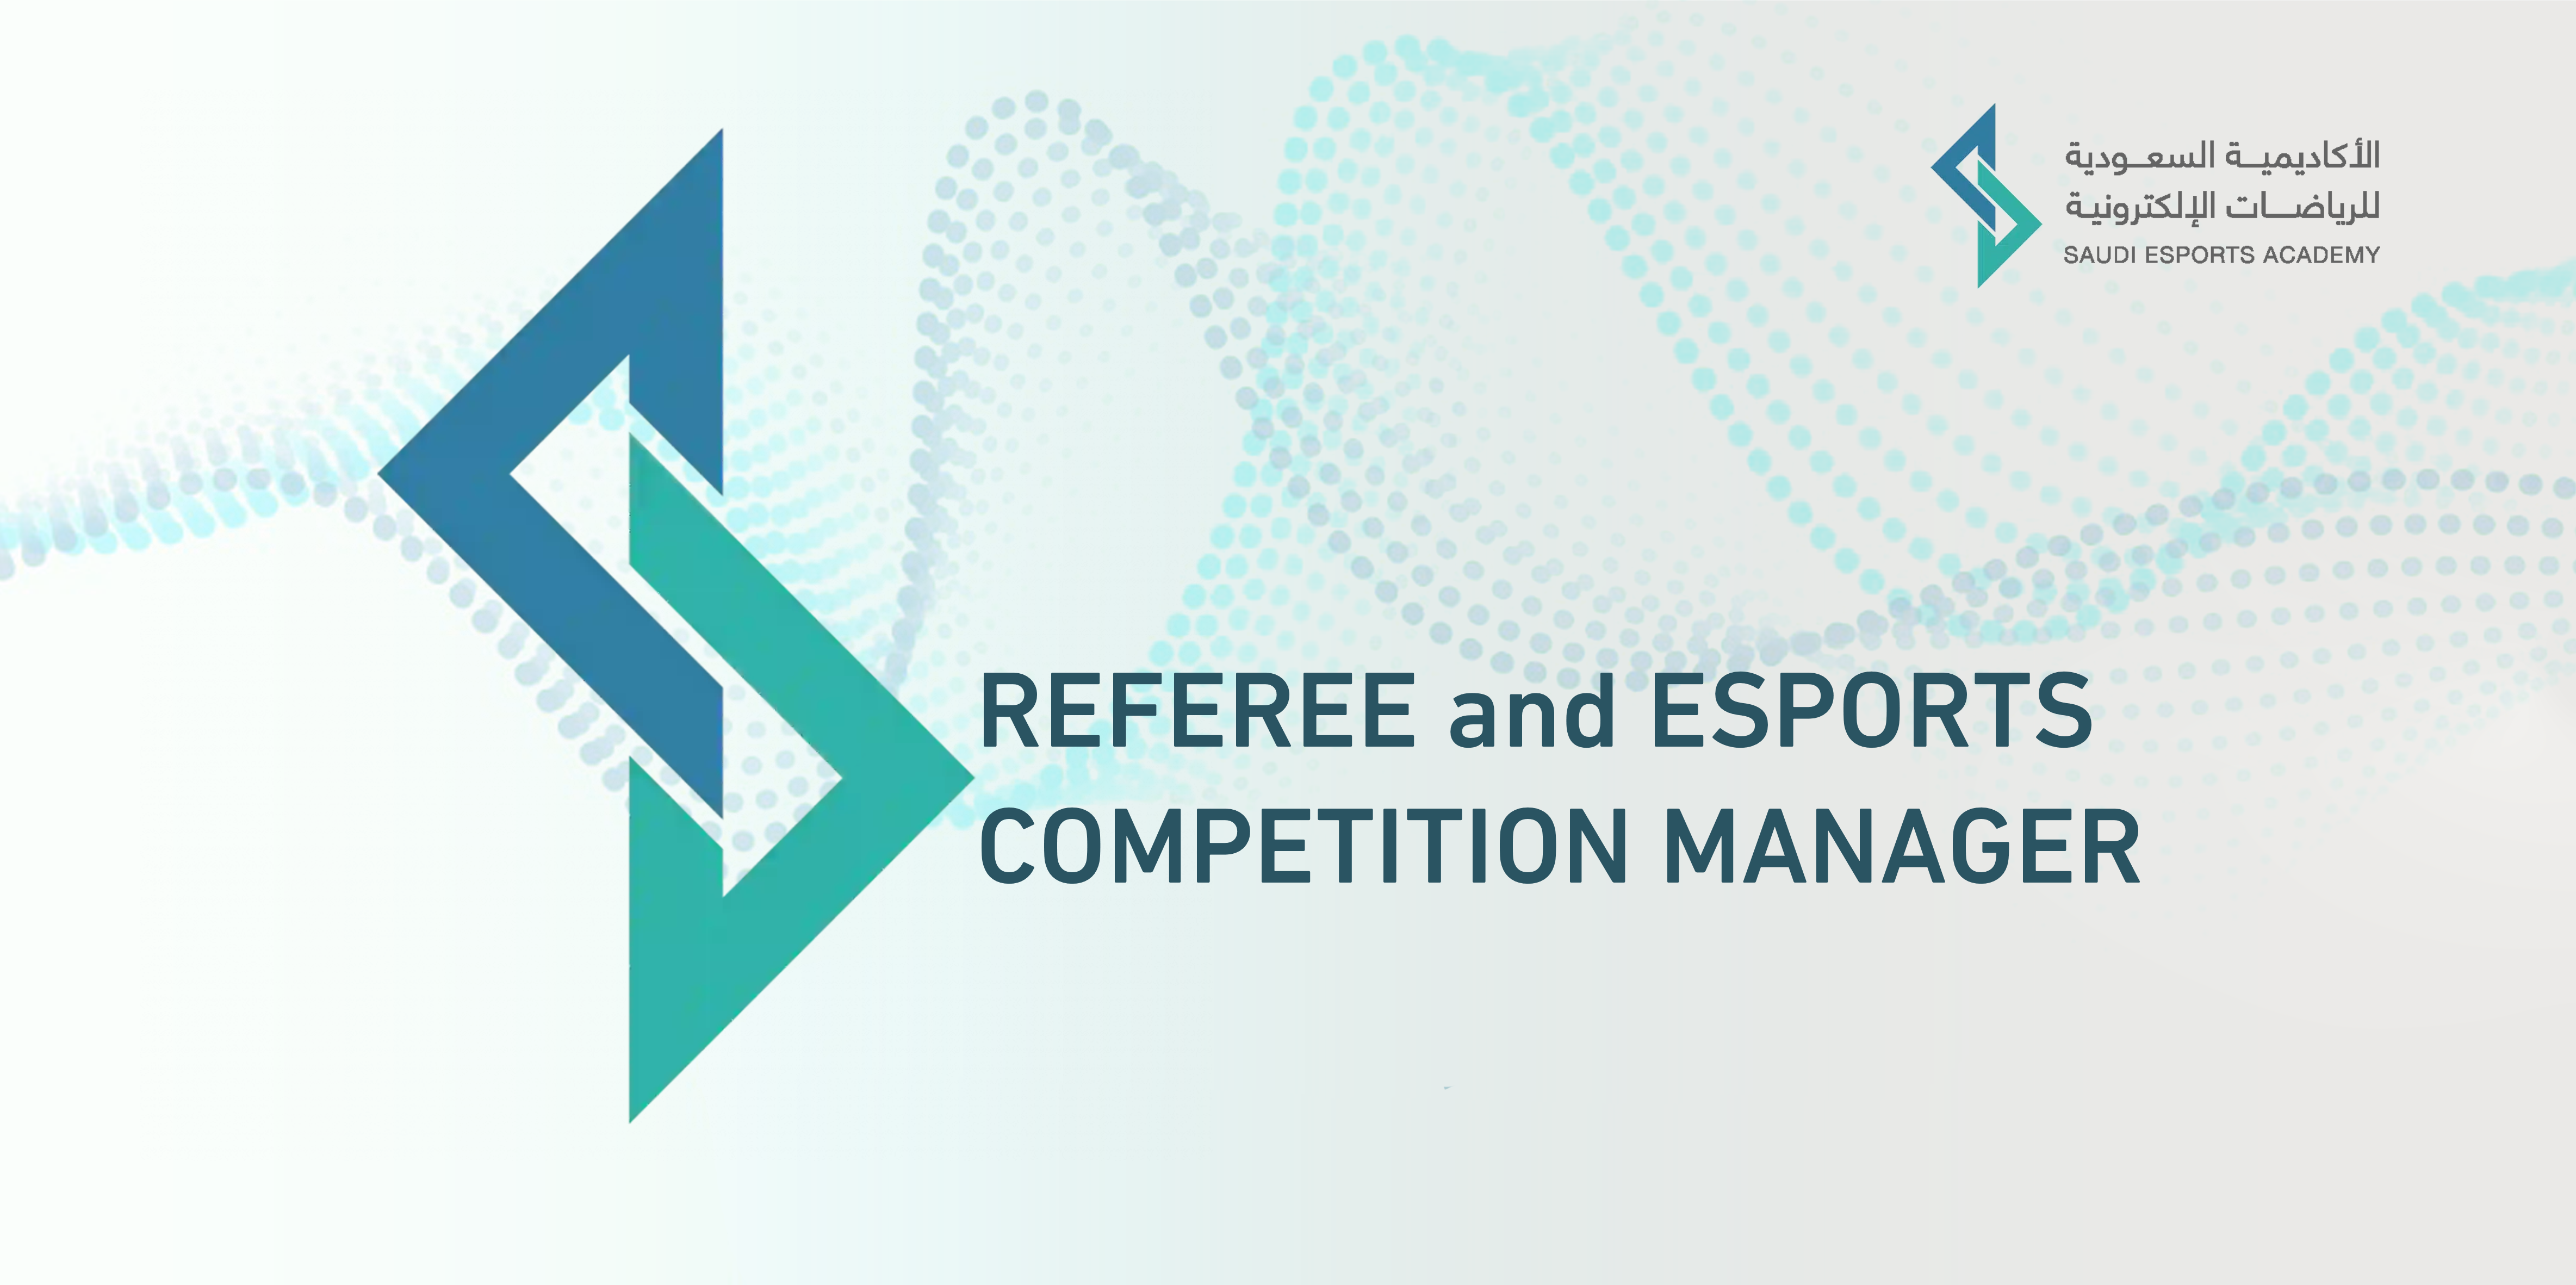 REFEREE and ESPORTS COMPETITION MANAGER 101